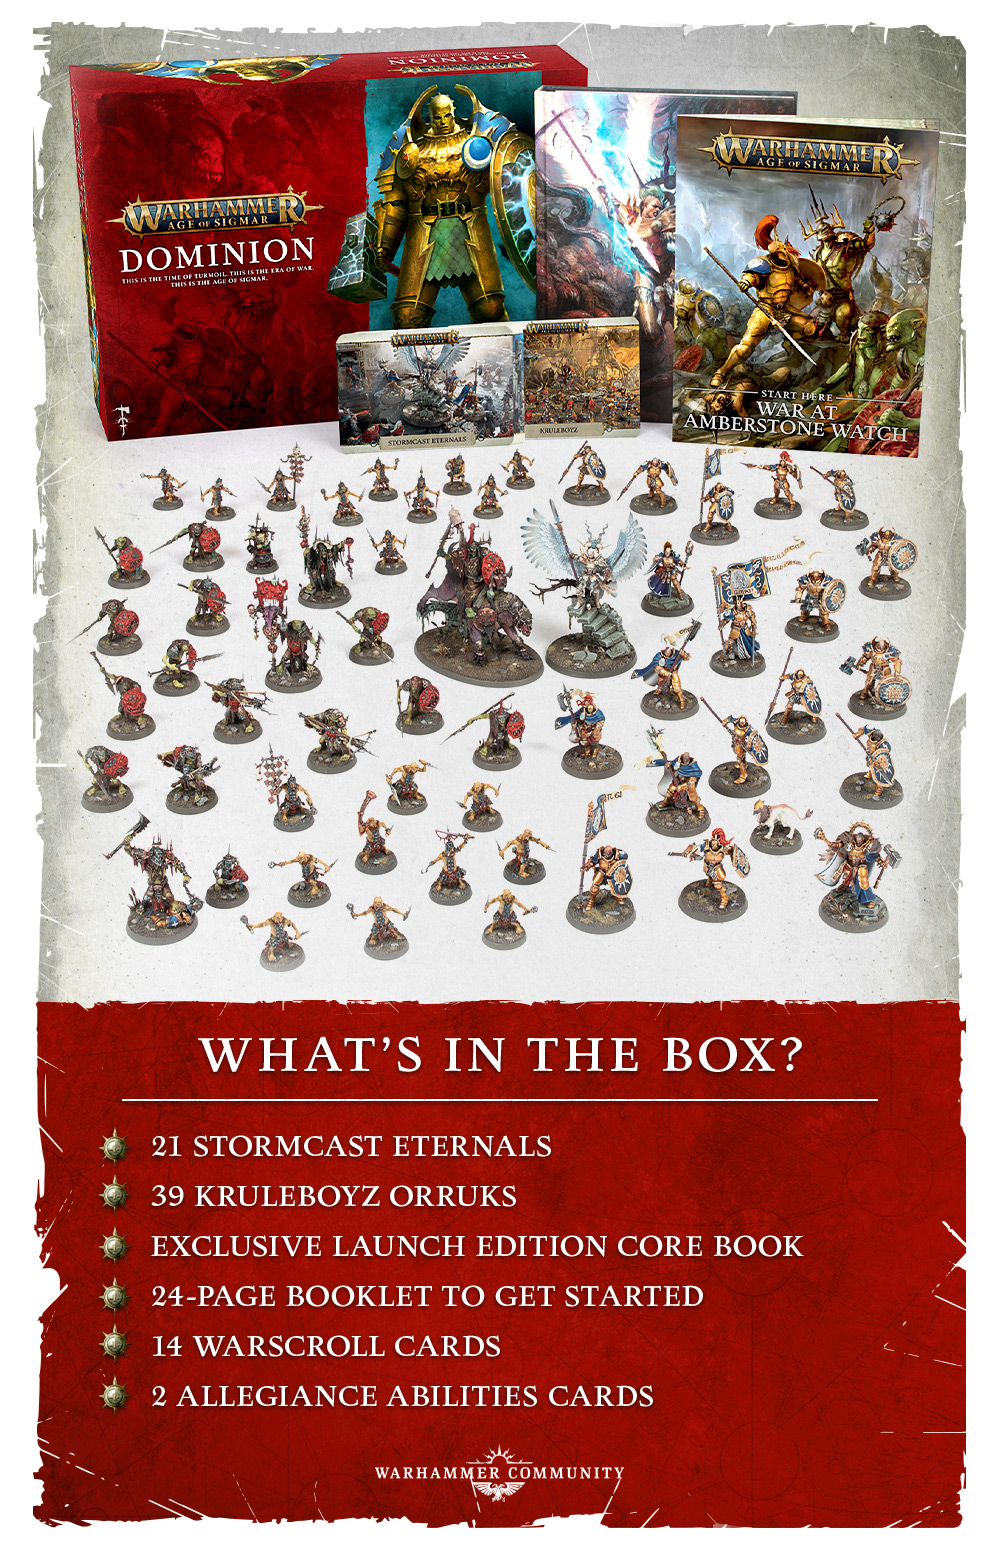 Warhammer Preview Online: Unboxing Dominion - Warhammer Community